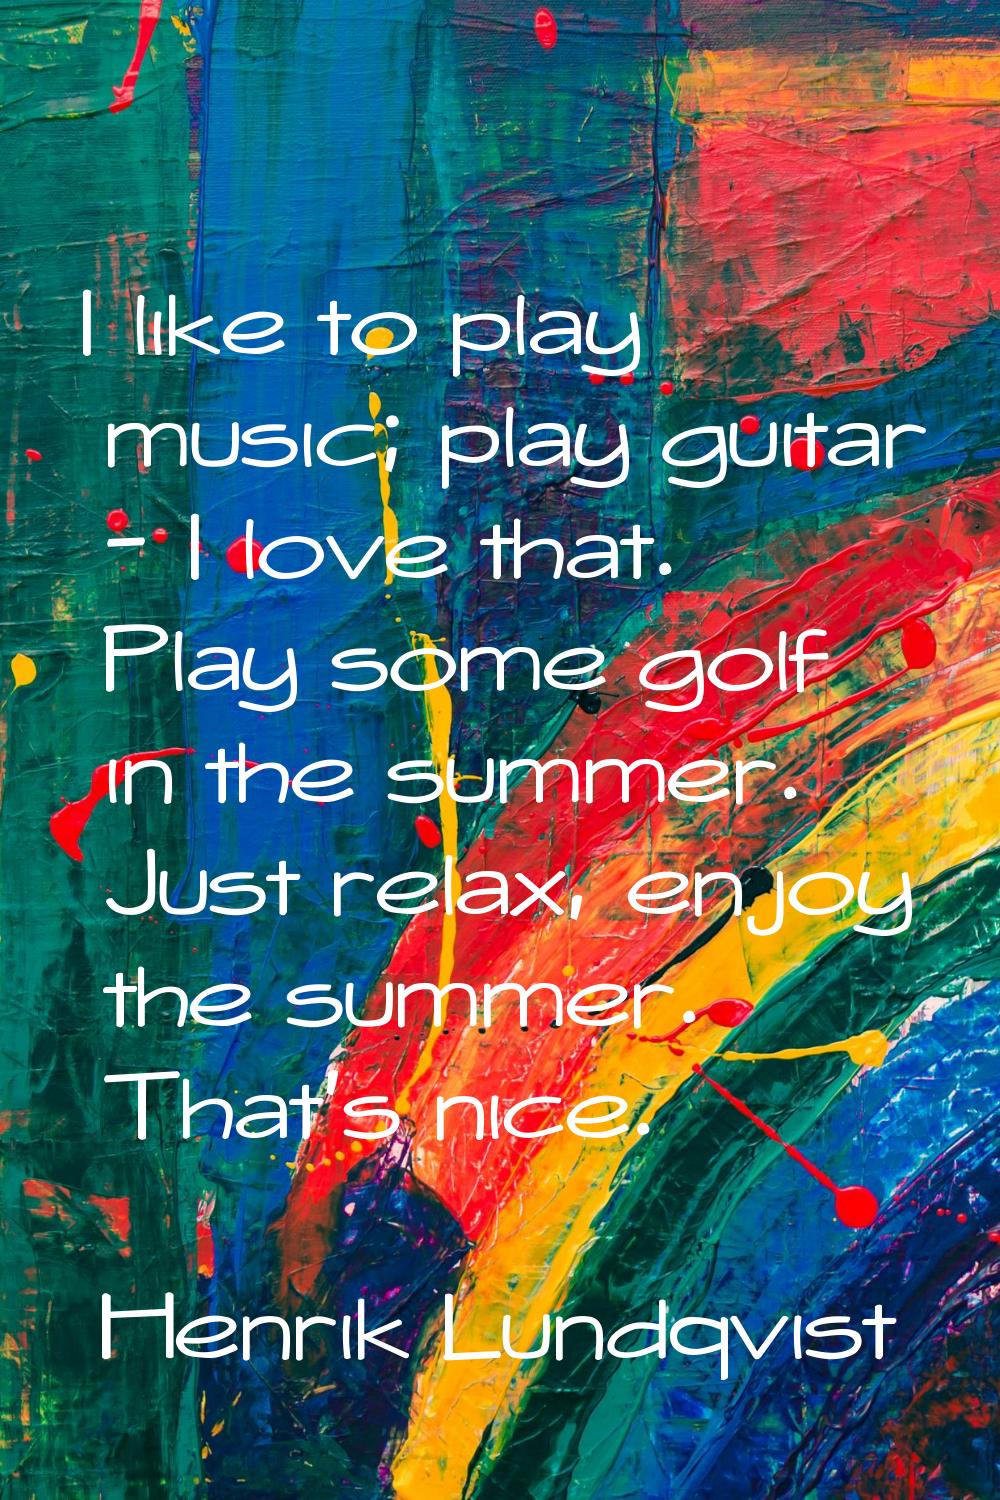 I like to play music; play guitar - I love that. Play some golf in the summer. Just relax, enjoy th